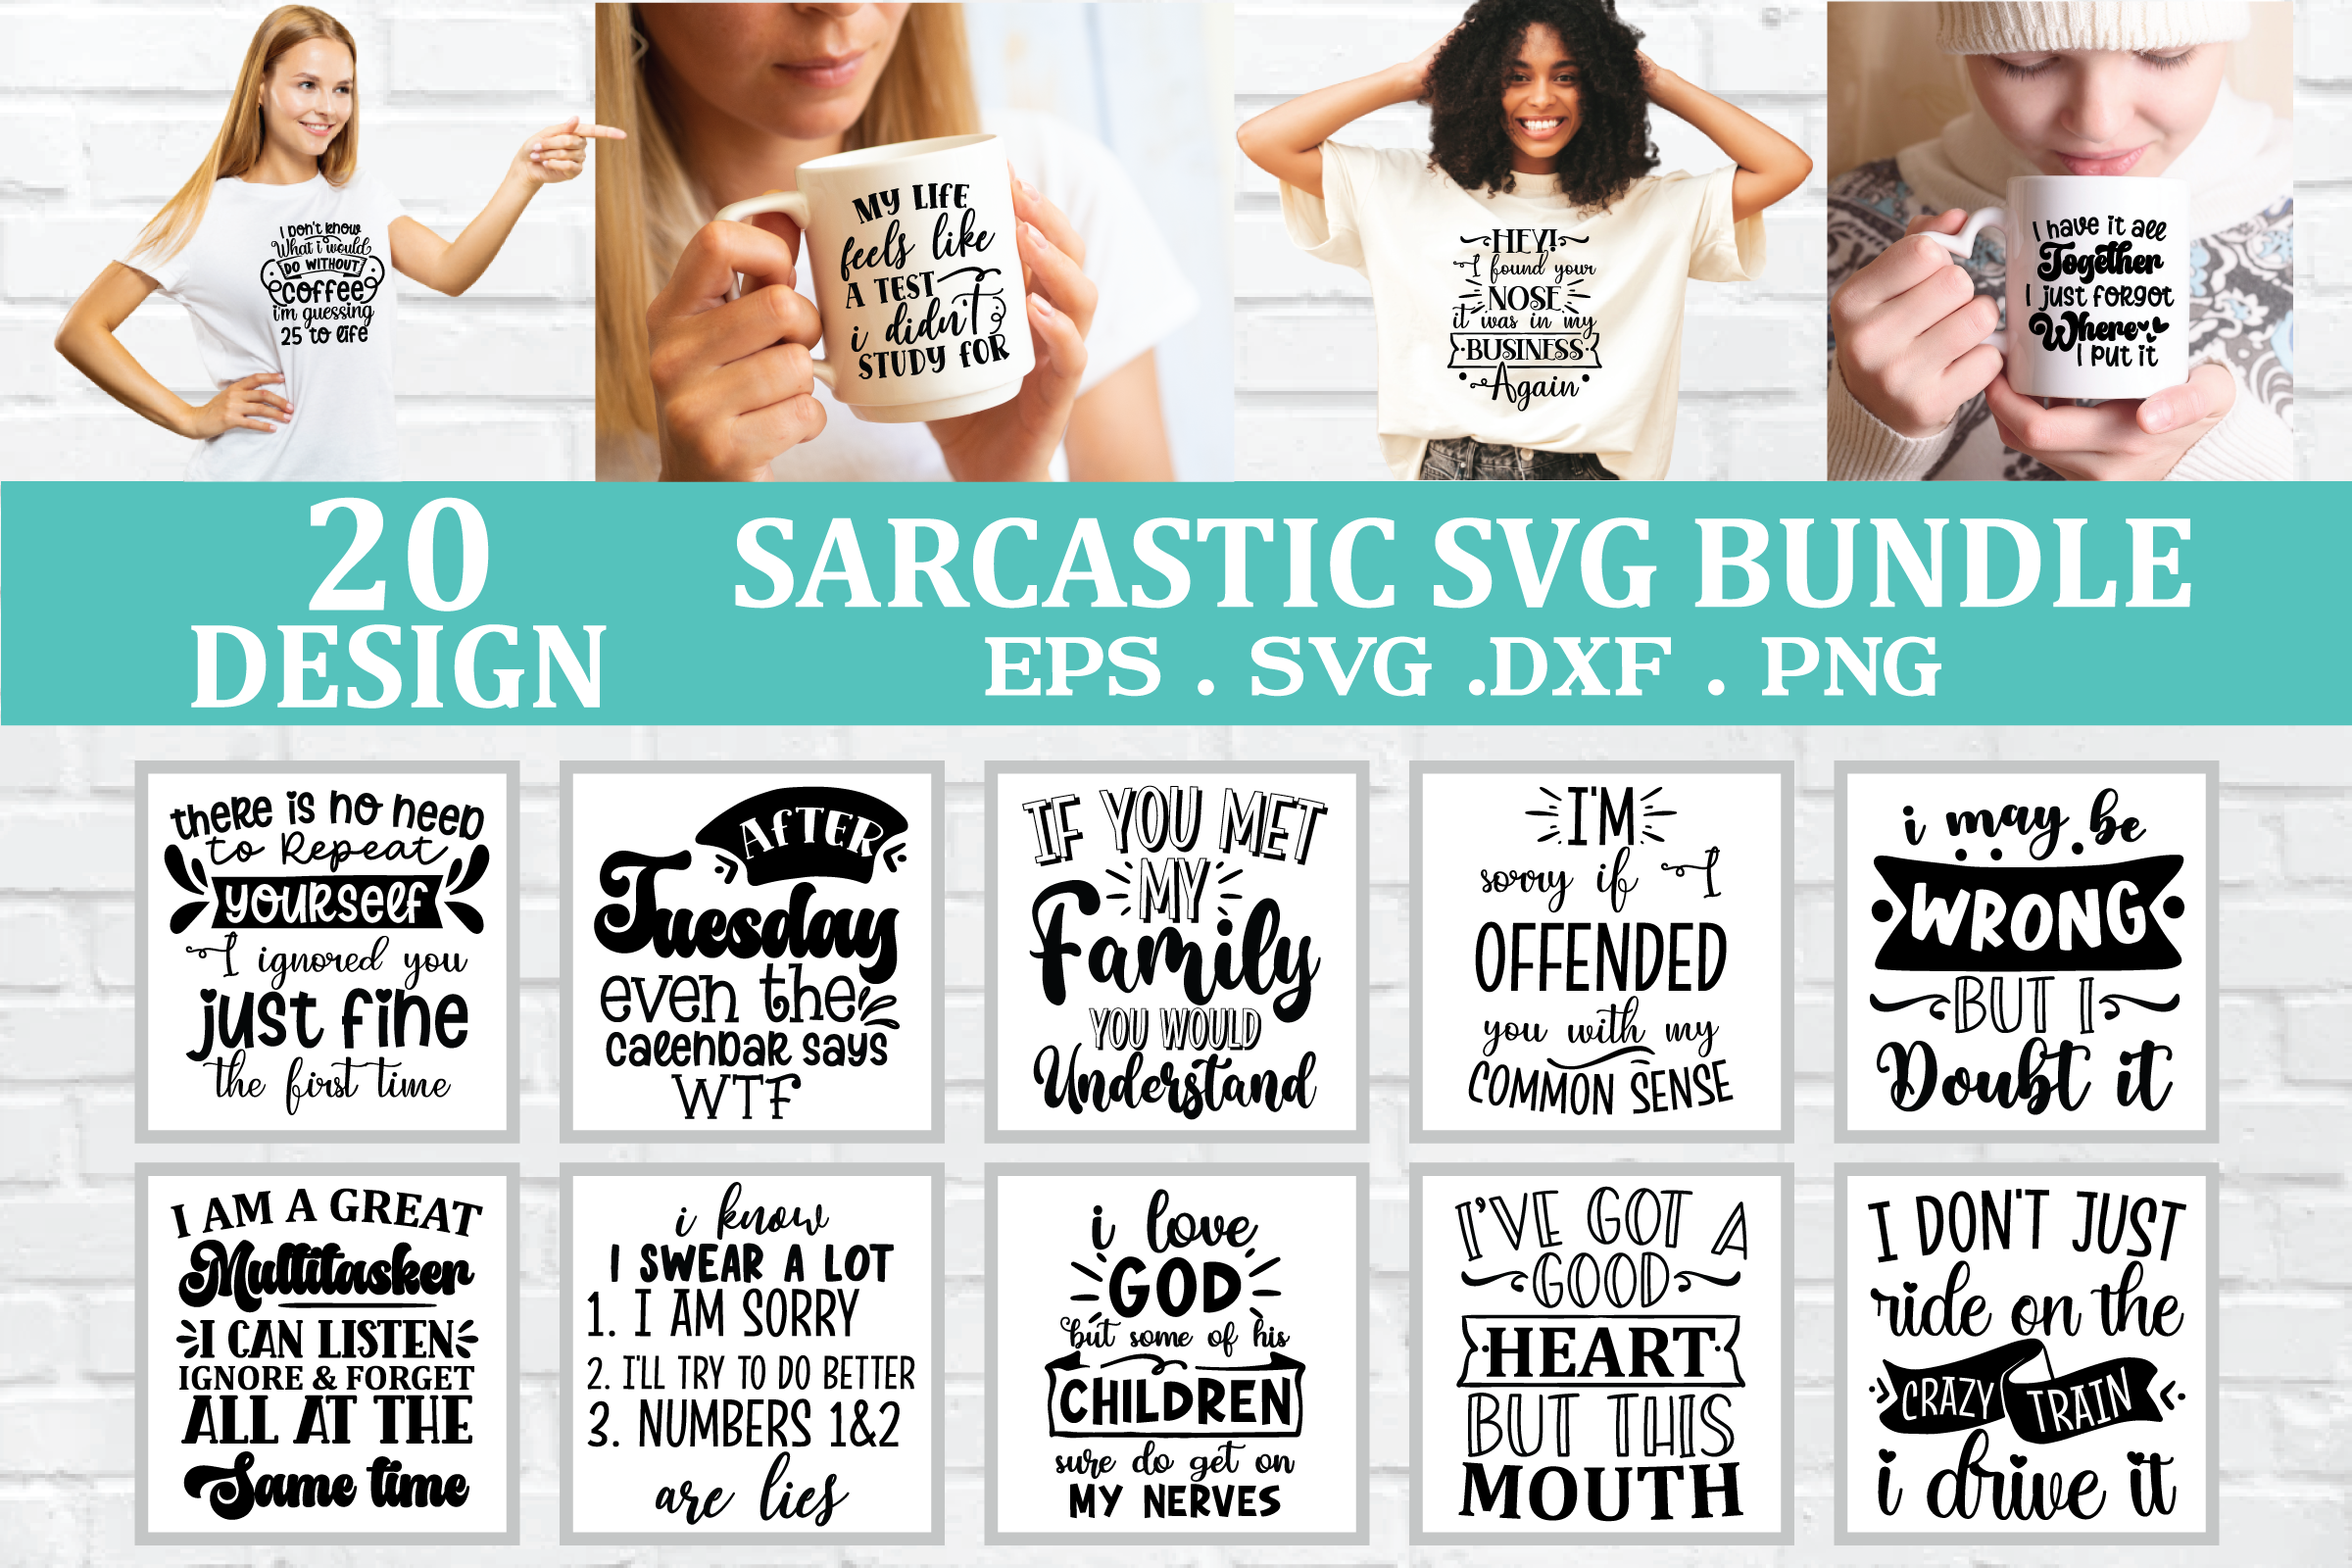 Funny sarcastic sassy quote for vector t shirt, mug, card. Funny